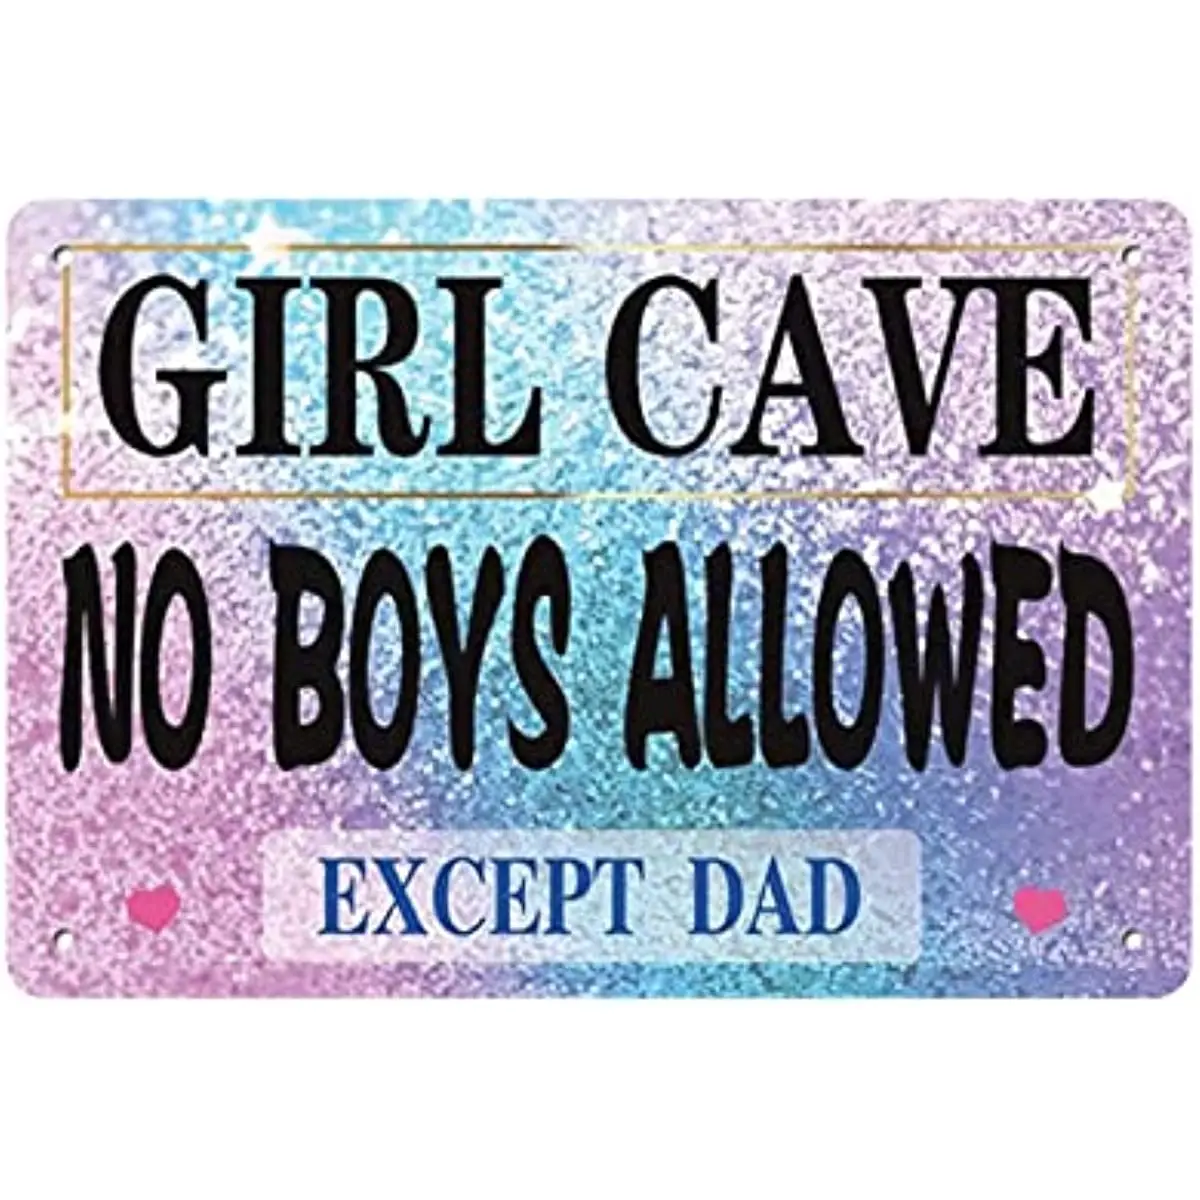 

New Metal Tin Sign Vintage Teen Girls Aesthetic Girl Cave No Boys Allowed Girl Cave for Home, Living Room, Garden